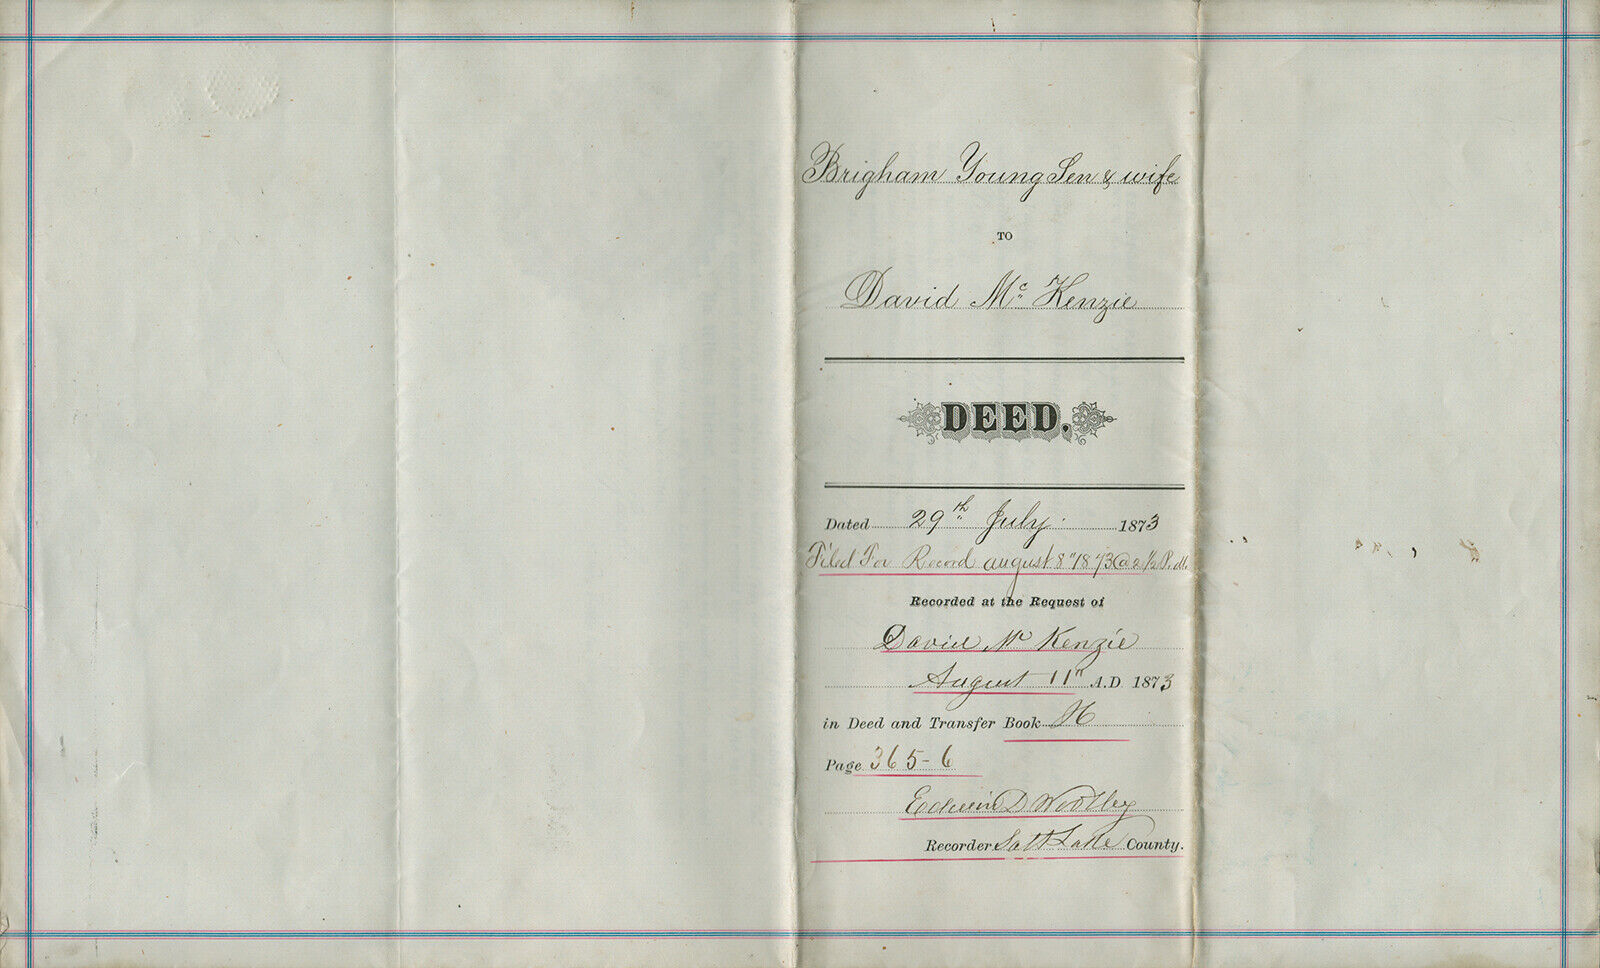 BRIGHAM YOUNG - DEED SIGNED 07/29/1873 CO-SIGNED BY: MARY ANN YOUNG